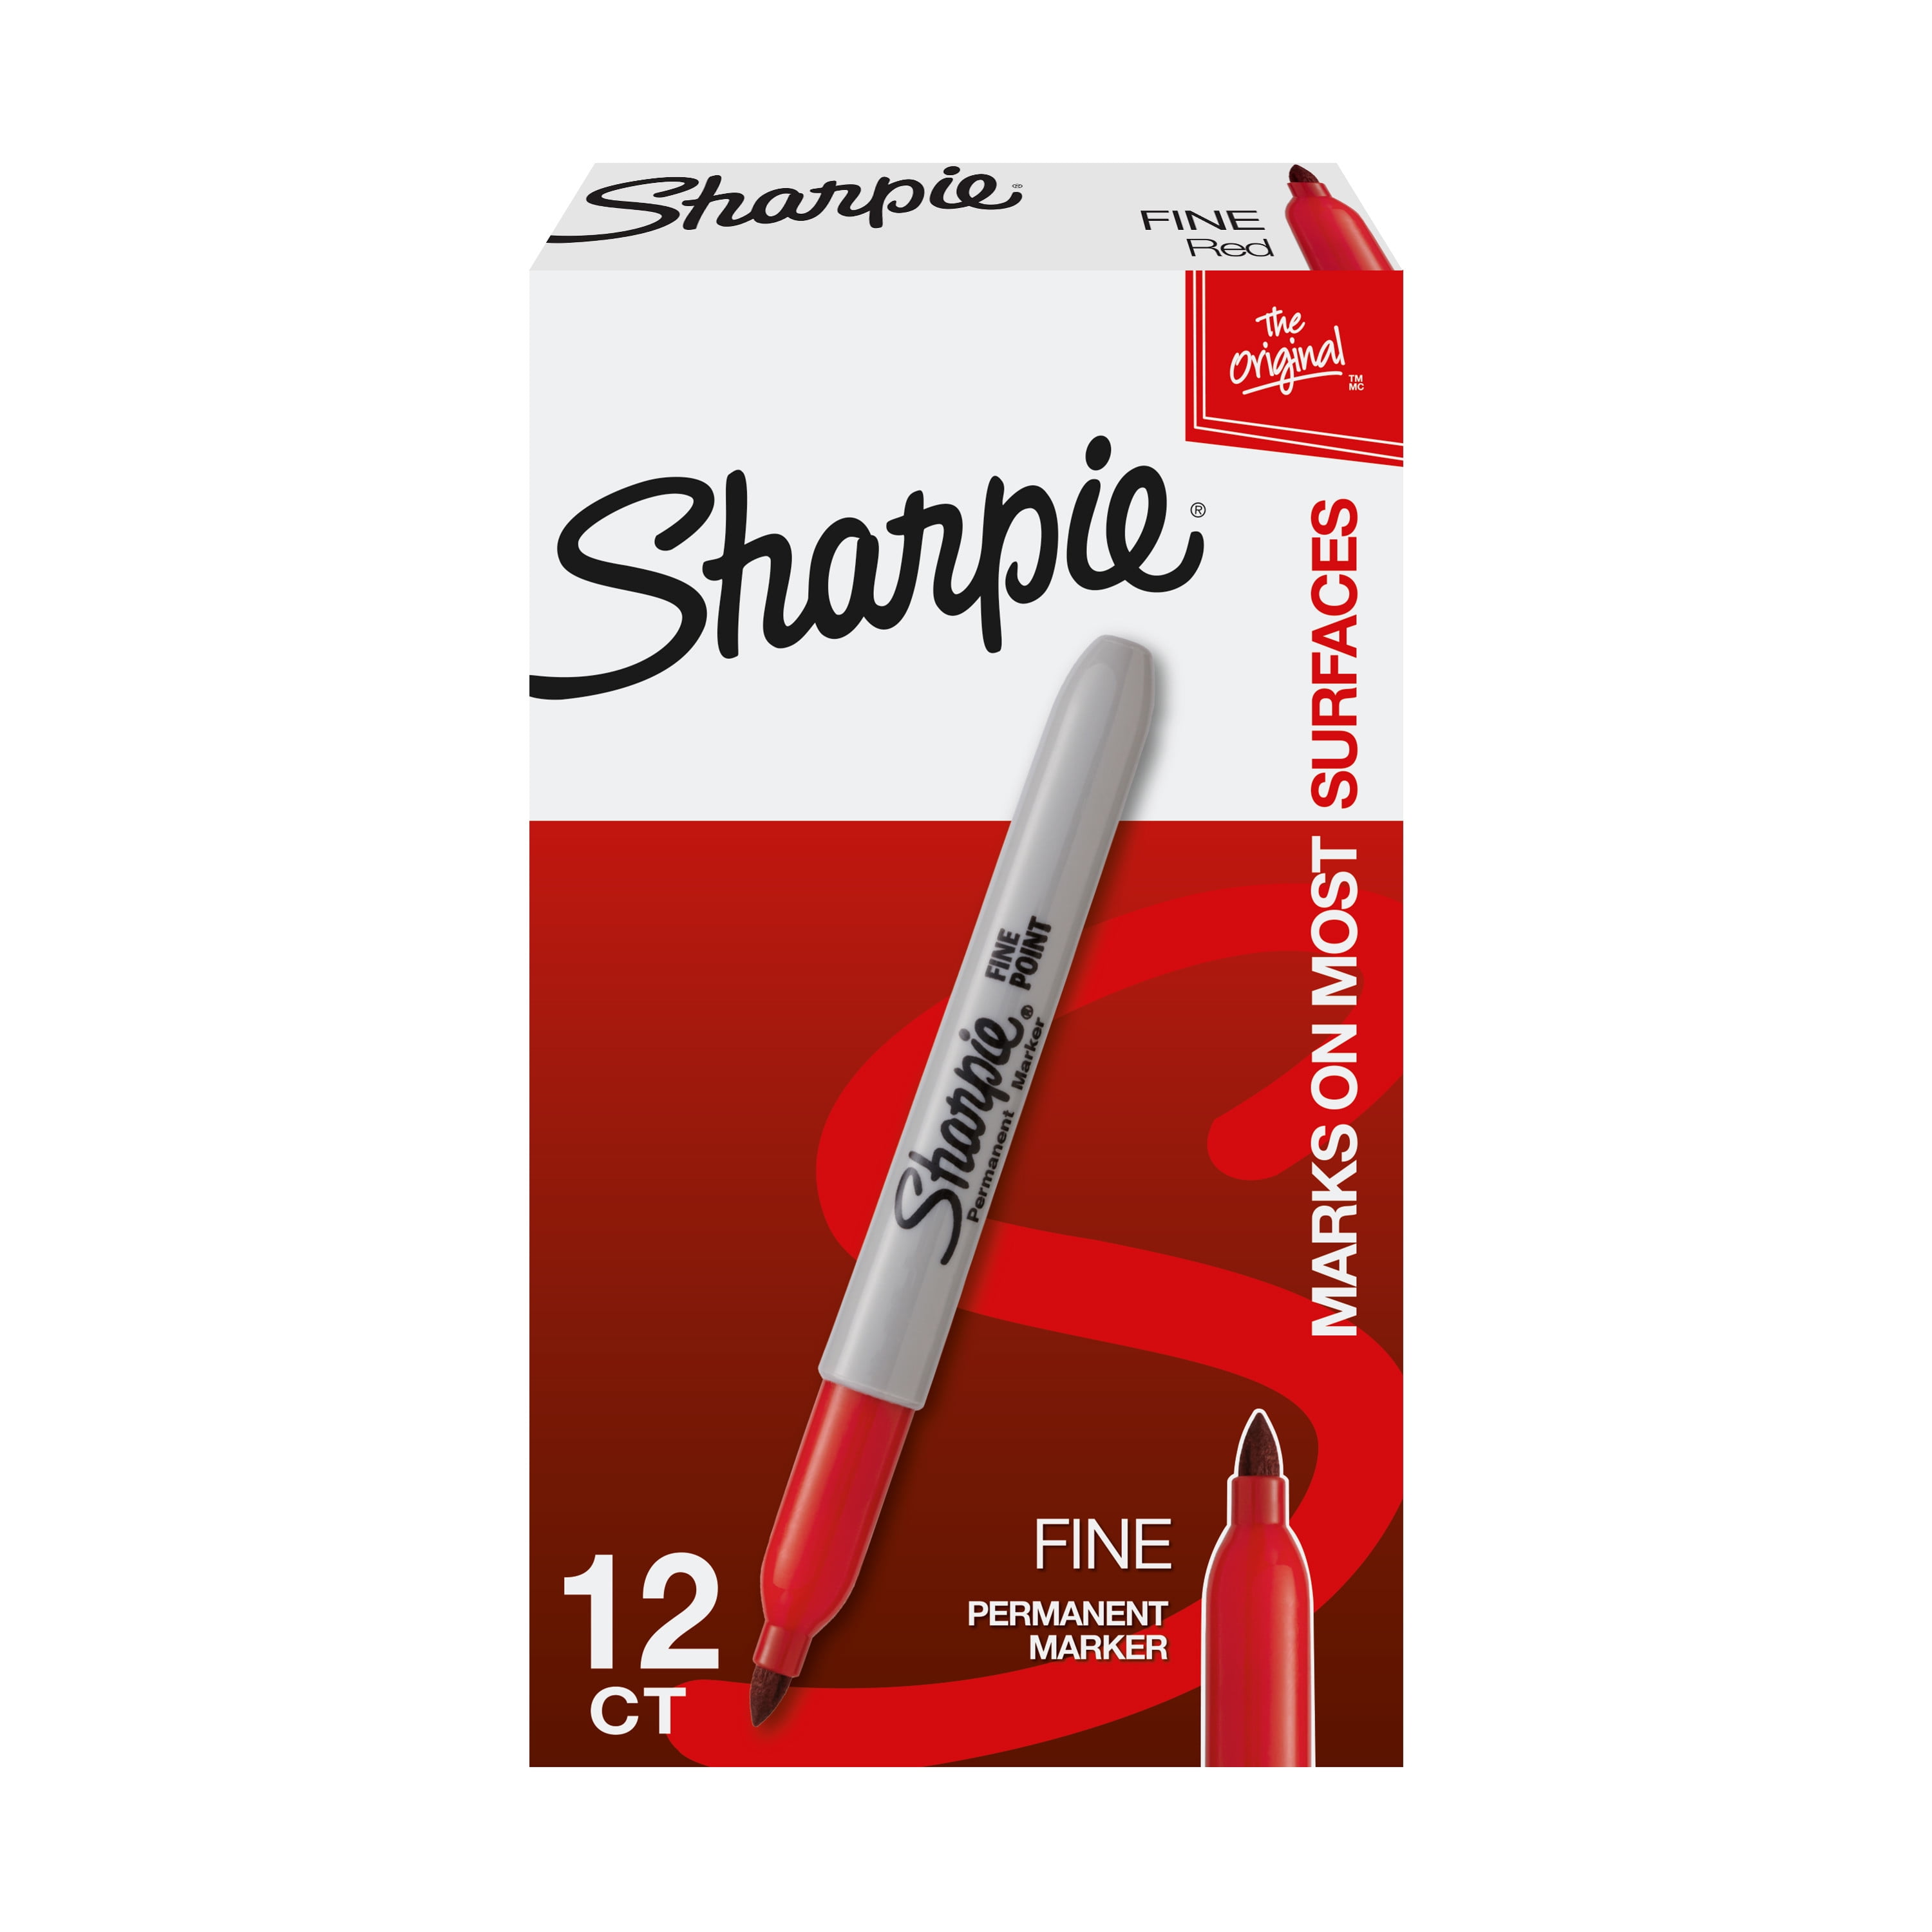 Sharpie Permanent Marker - 6 Pack - Assorted Sizes - Ultra Fine Tip, Fine  Tip & Chisel Tip Permanent Marker, Marks on Paper and Plastic, Resist  Fading